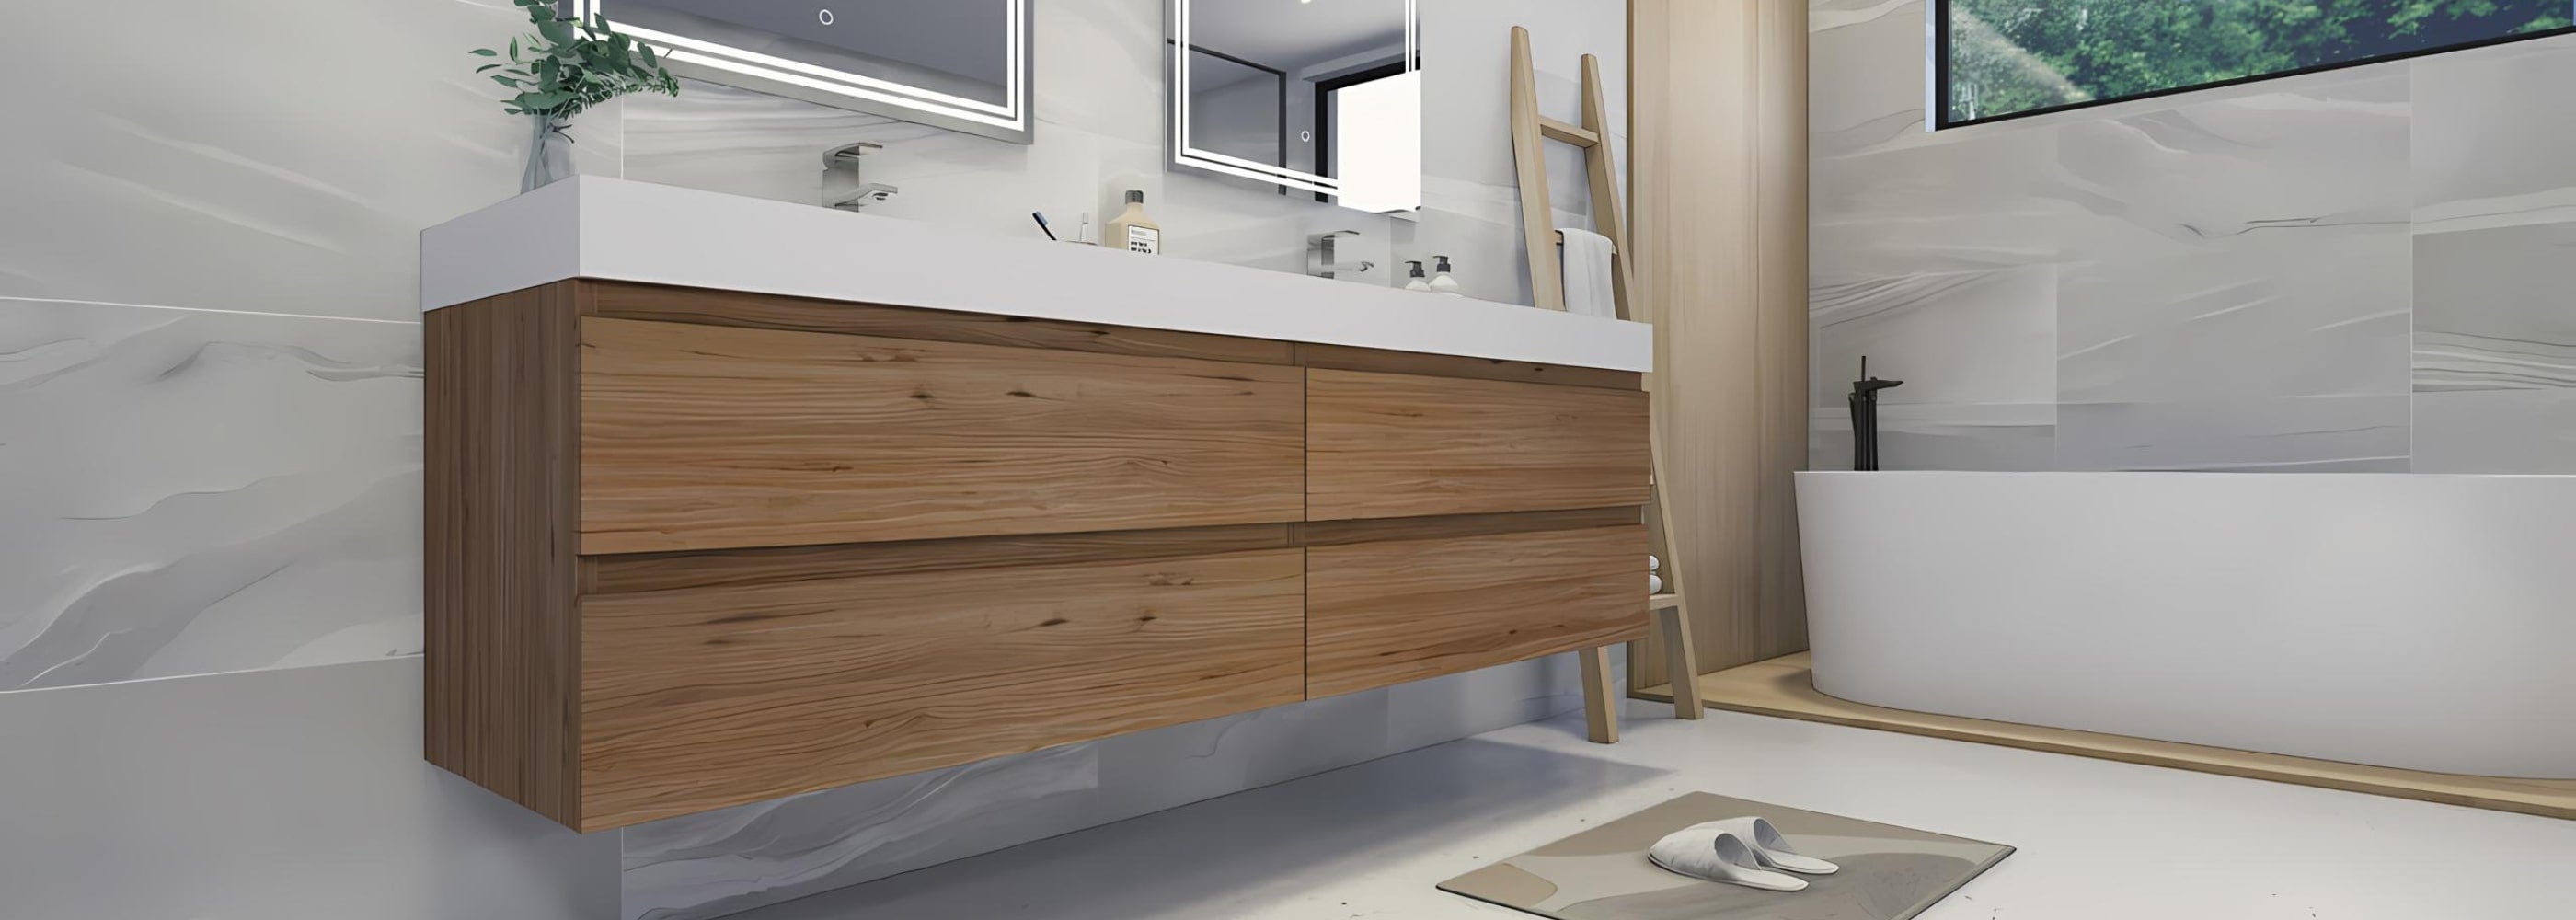 The latest Blink 84 is the premier luxury bathroom vanity for your next makeover